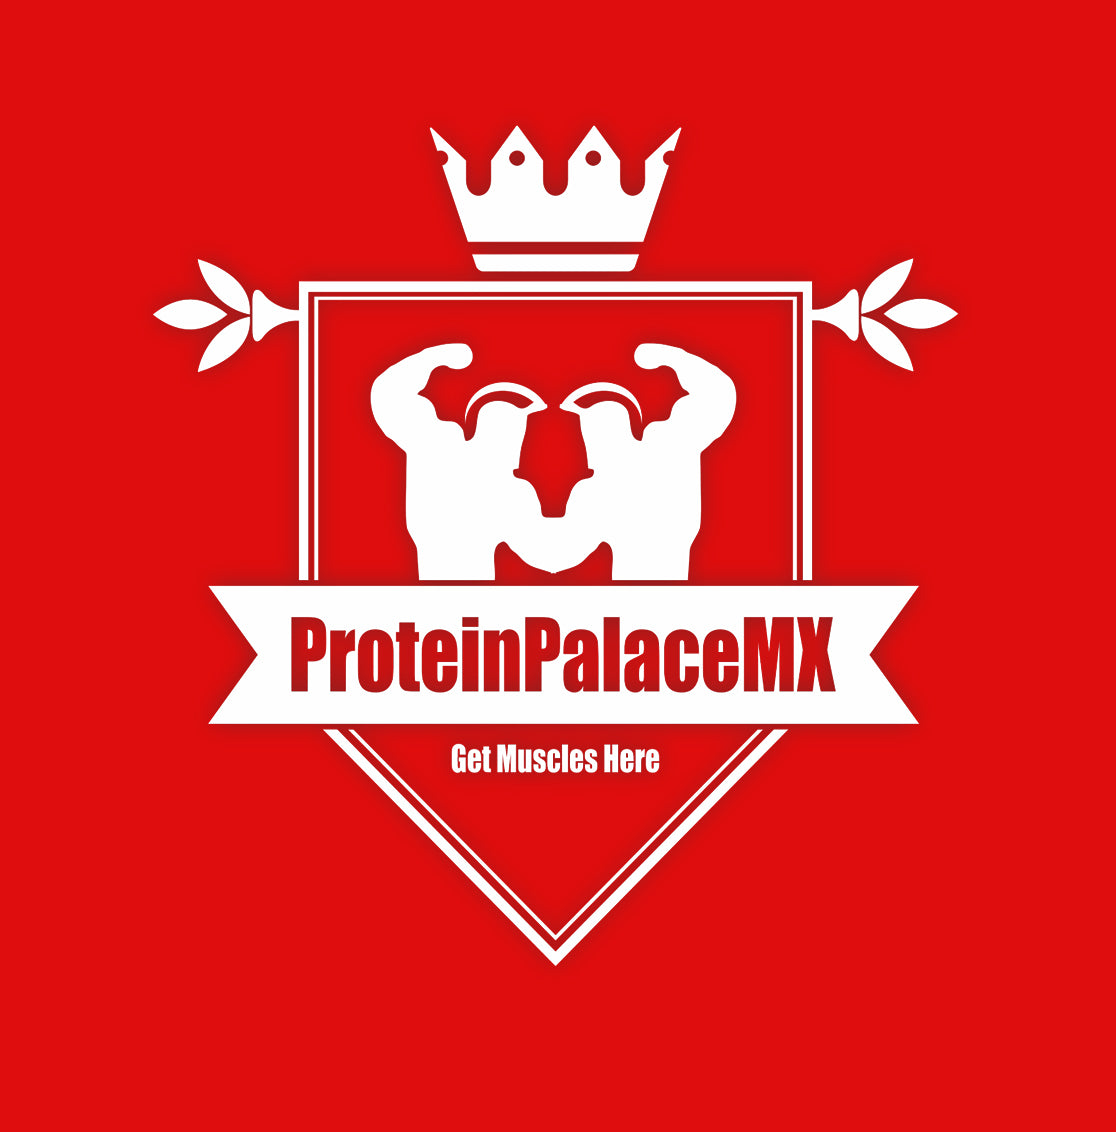 Protein Palace Mx